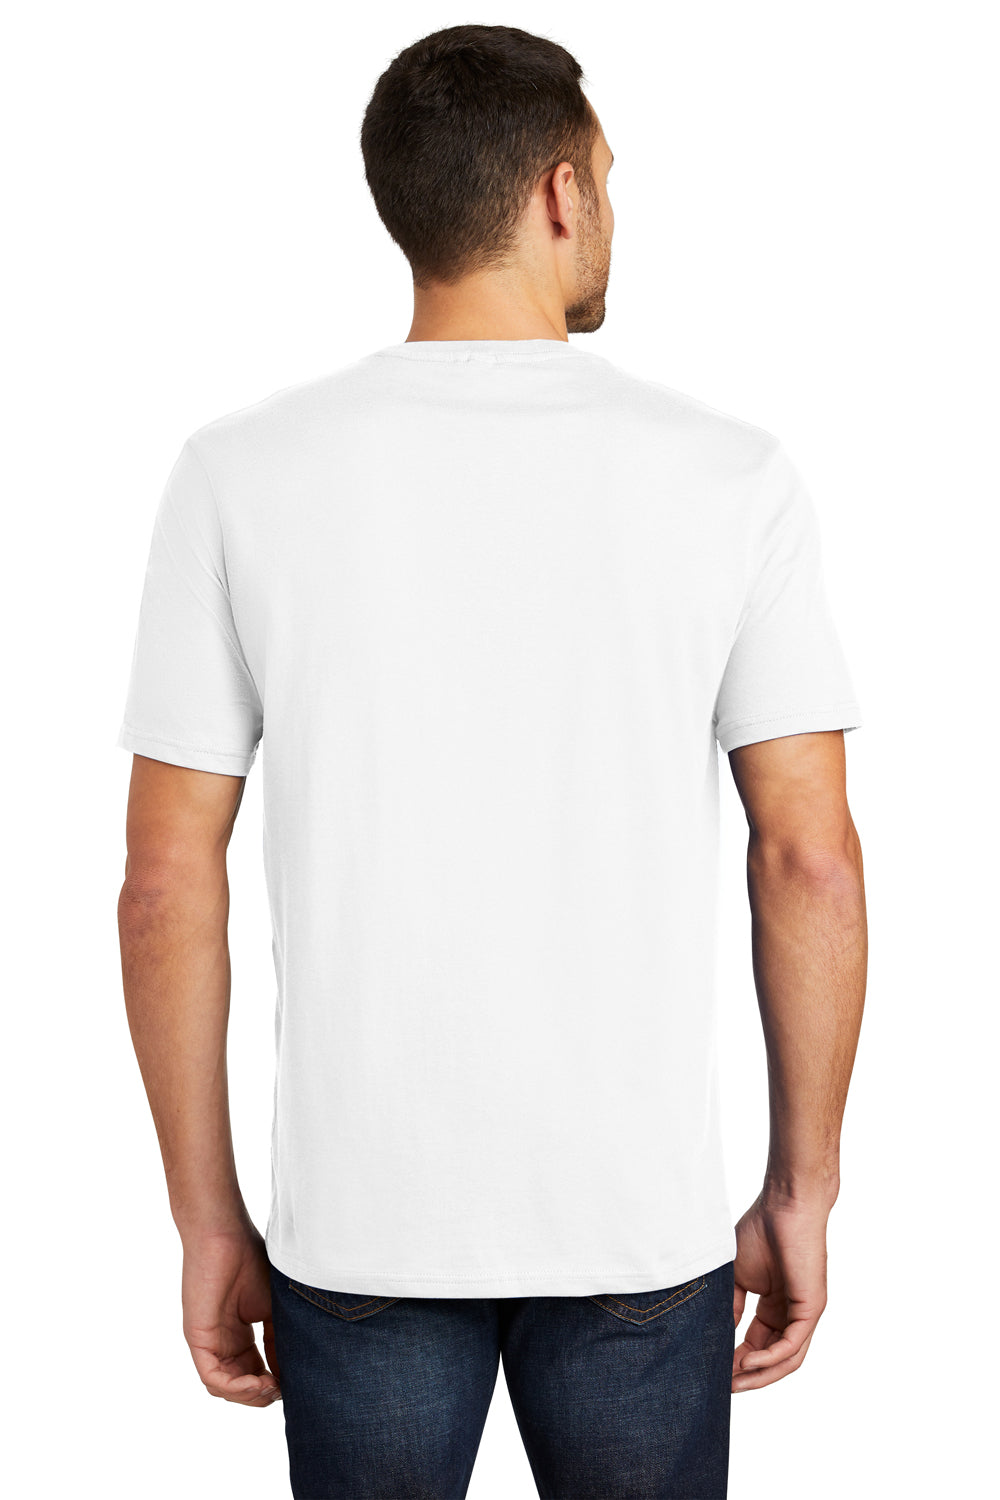 District DT104 Mens Perfect Weight Short Sleeve Crewneck T-Shirt White Back